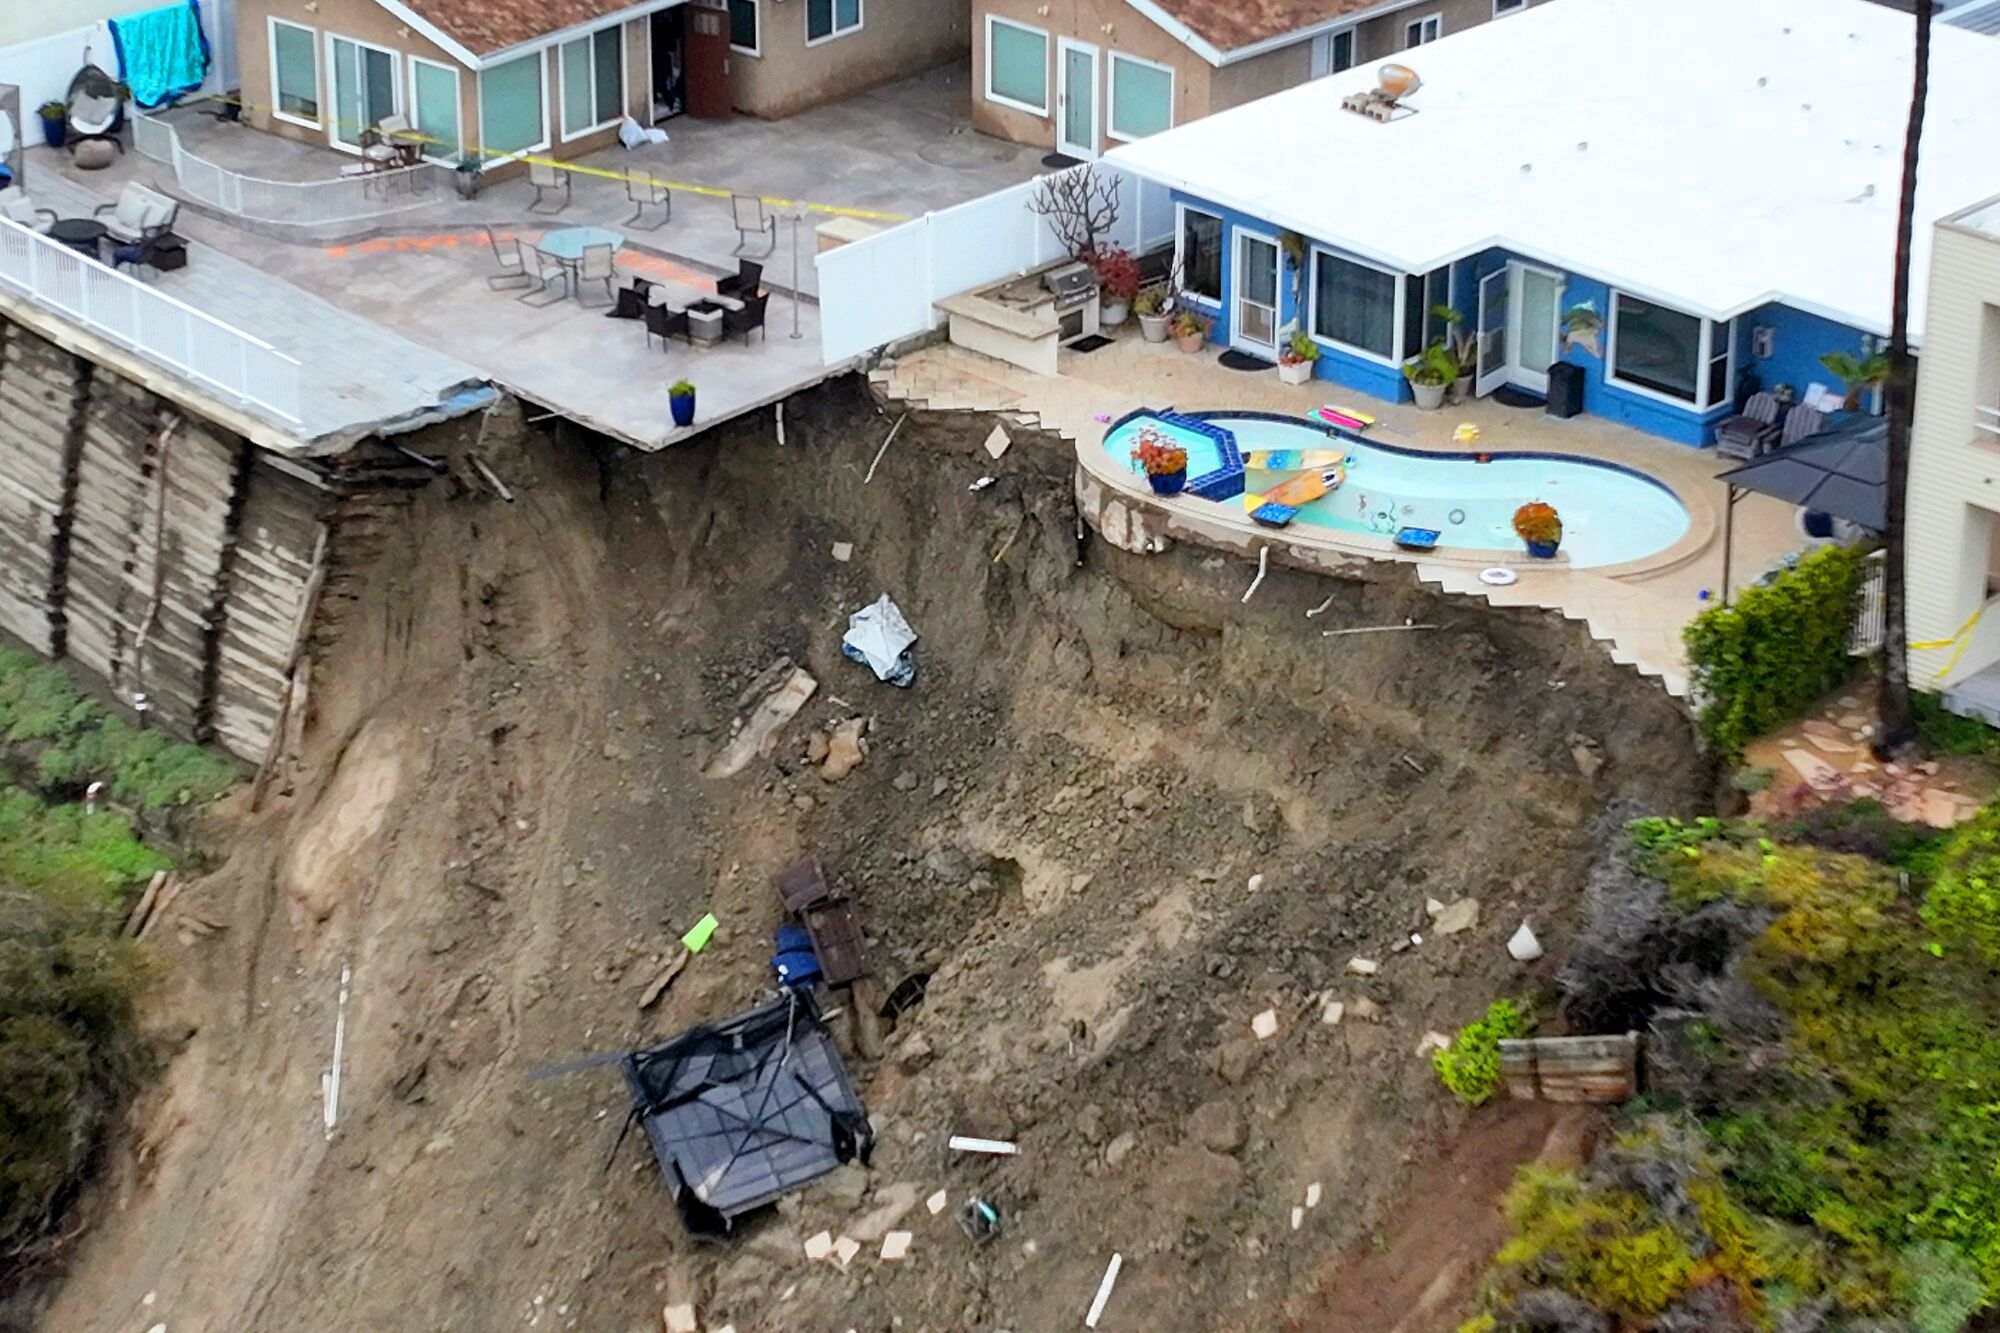 An aerial view of a back yard.